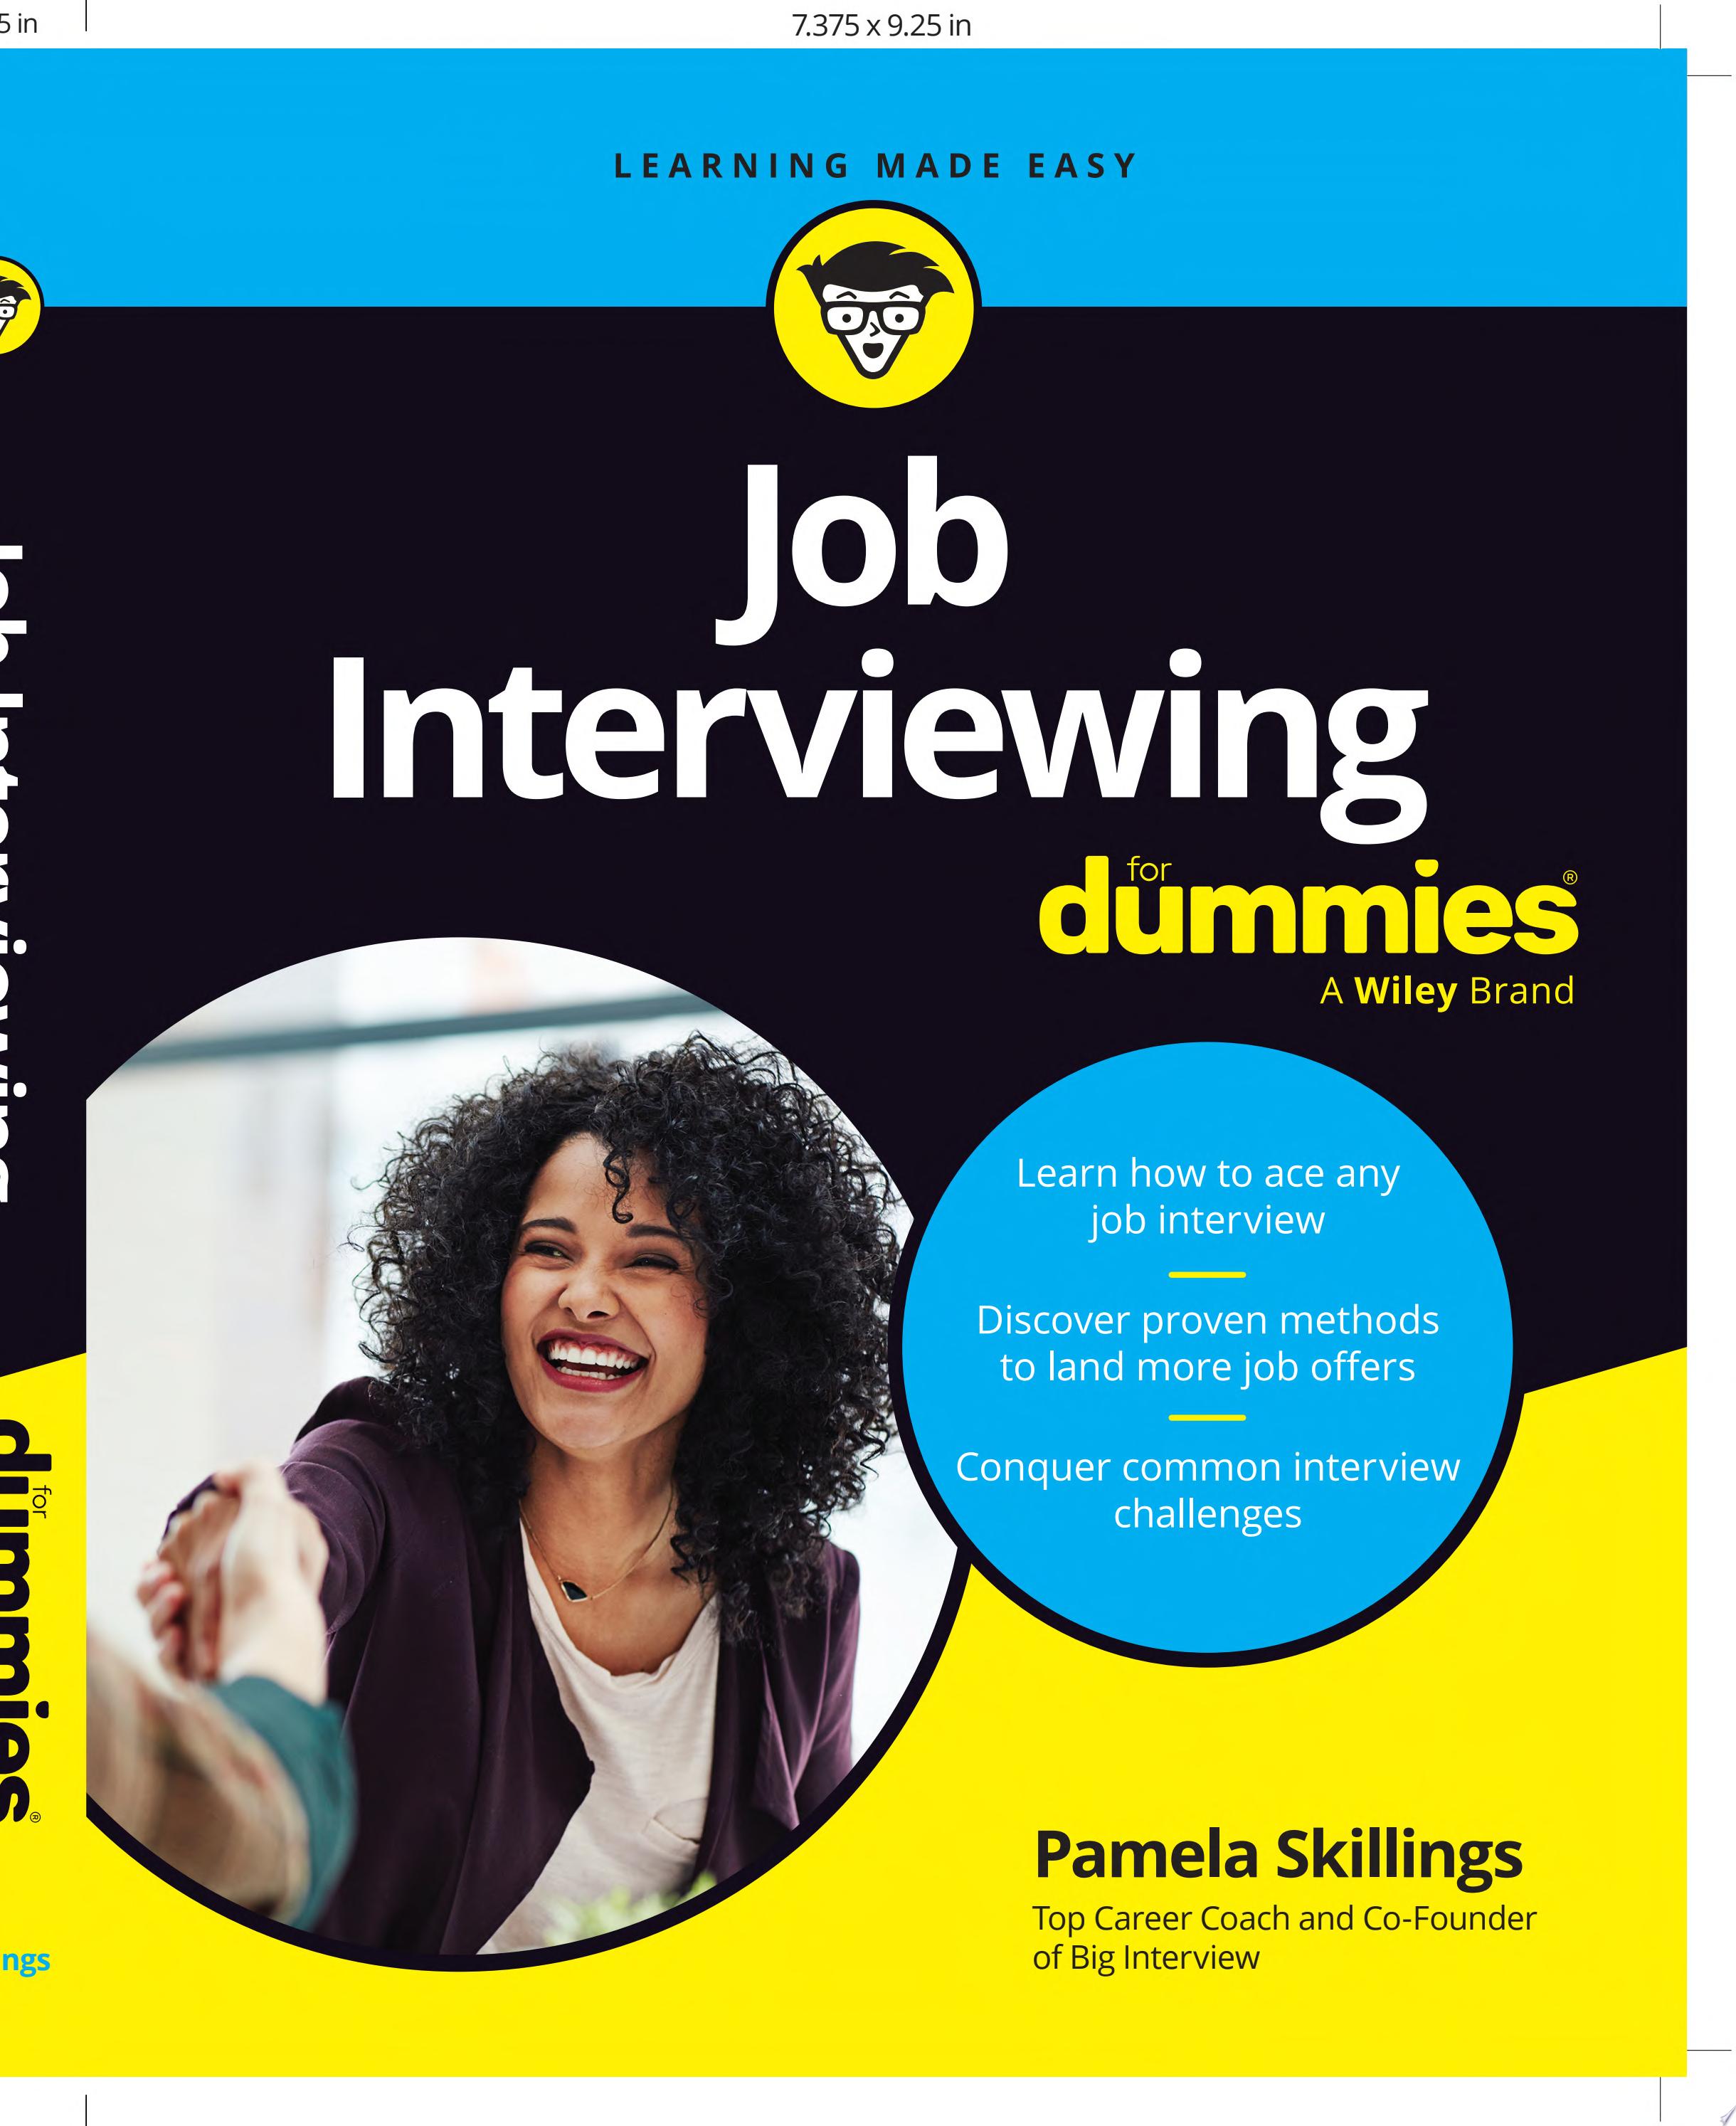 Image for "Job Interviewing For Dummies"